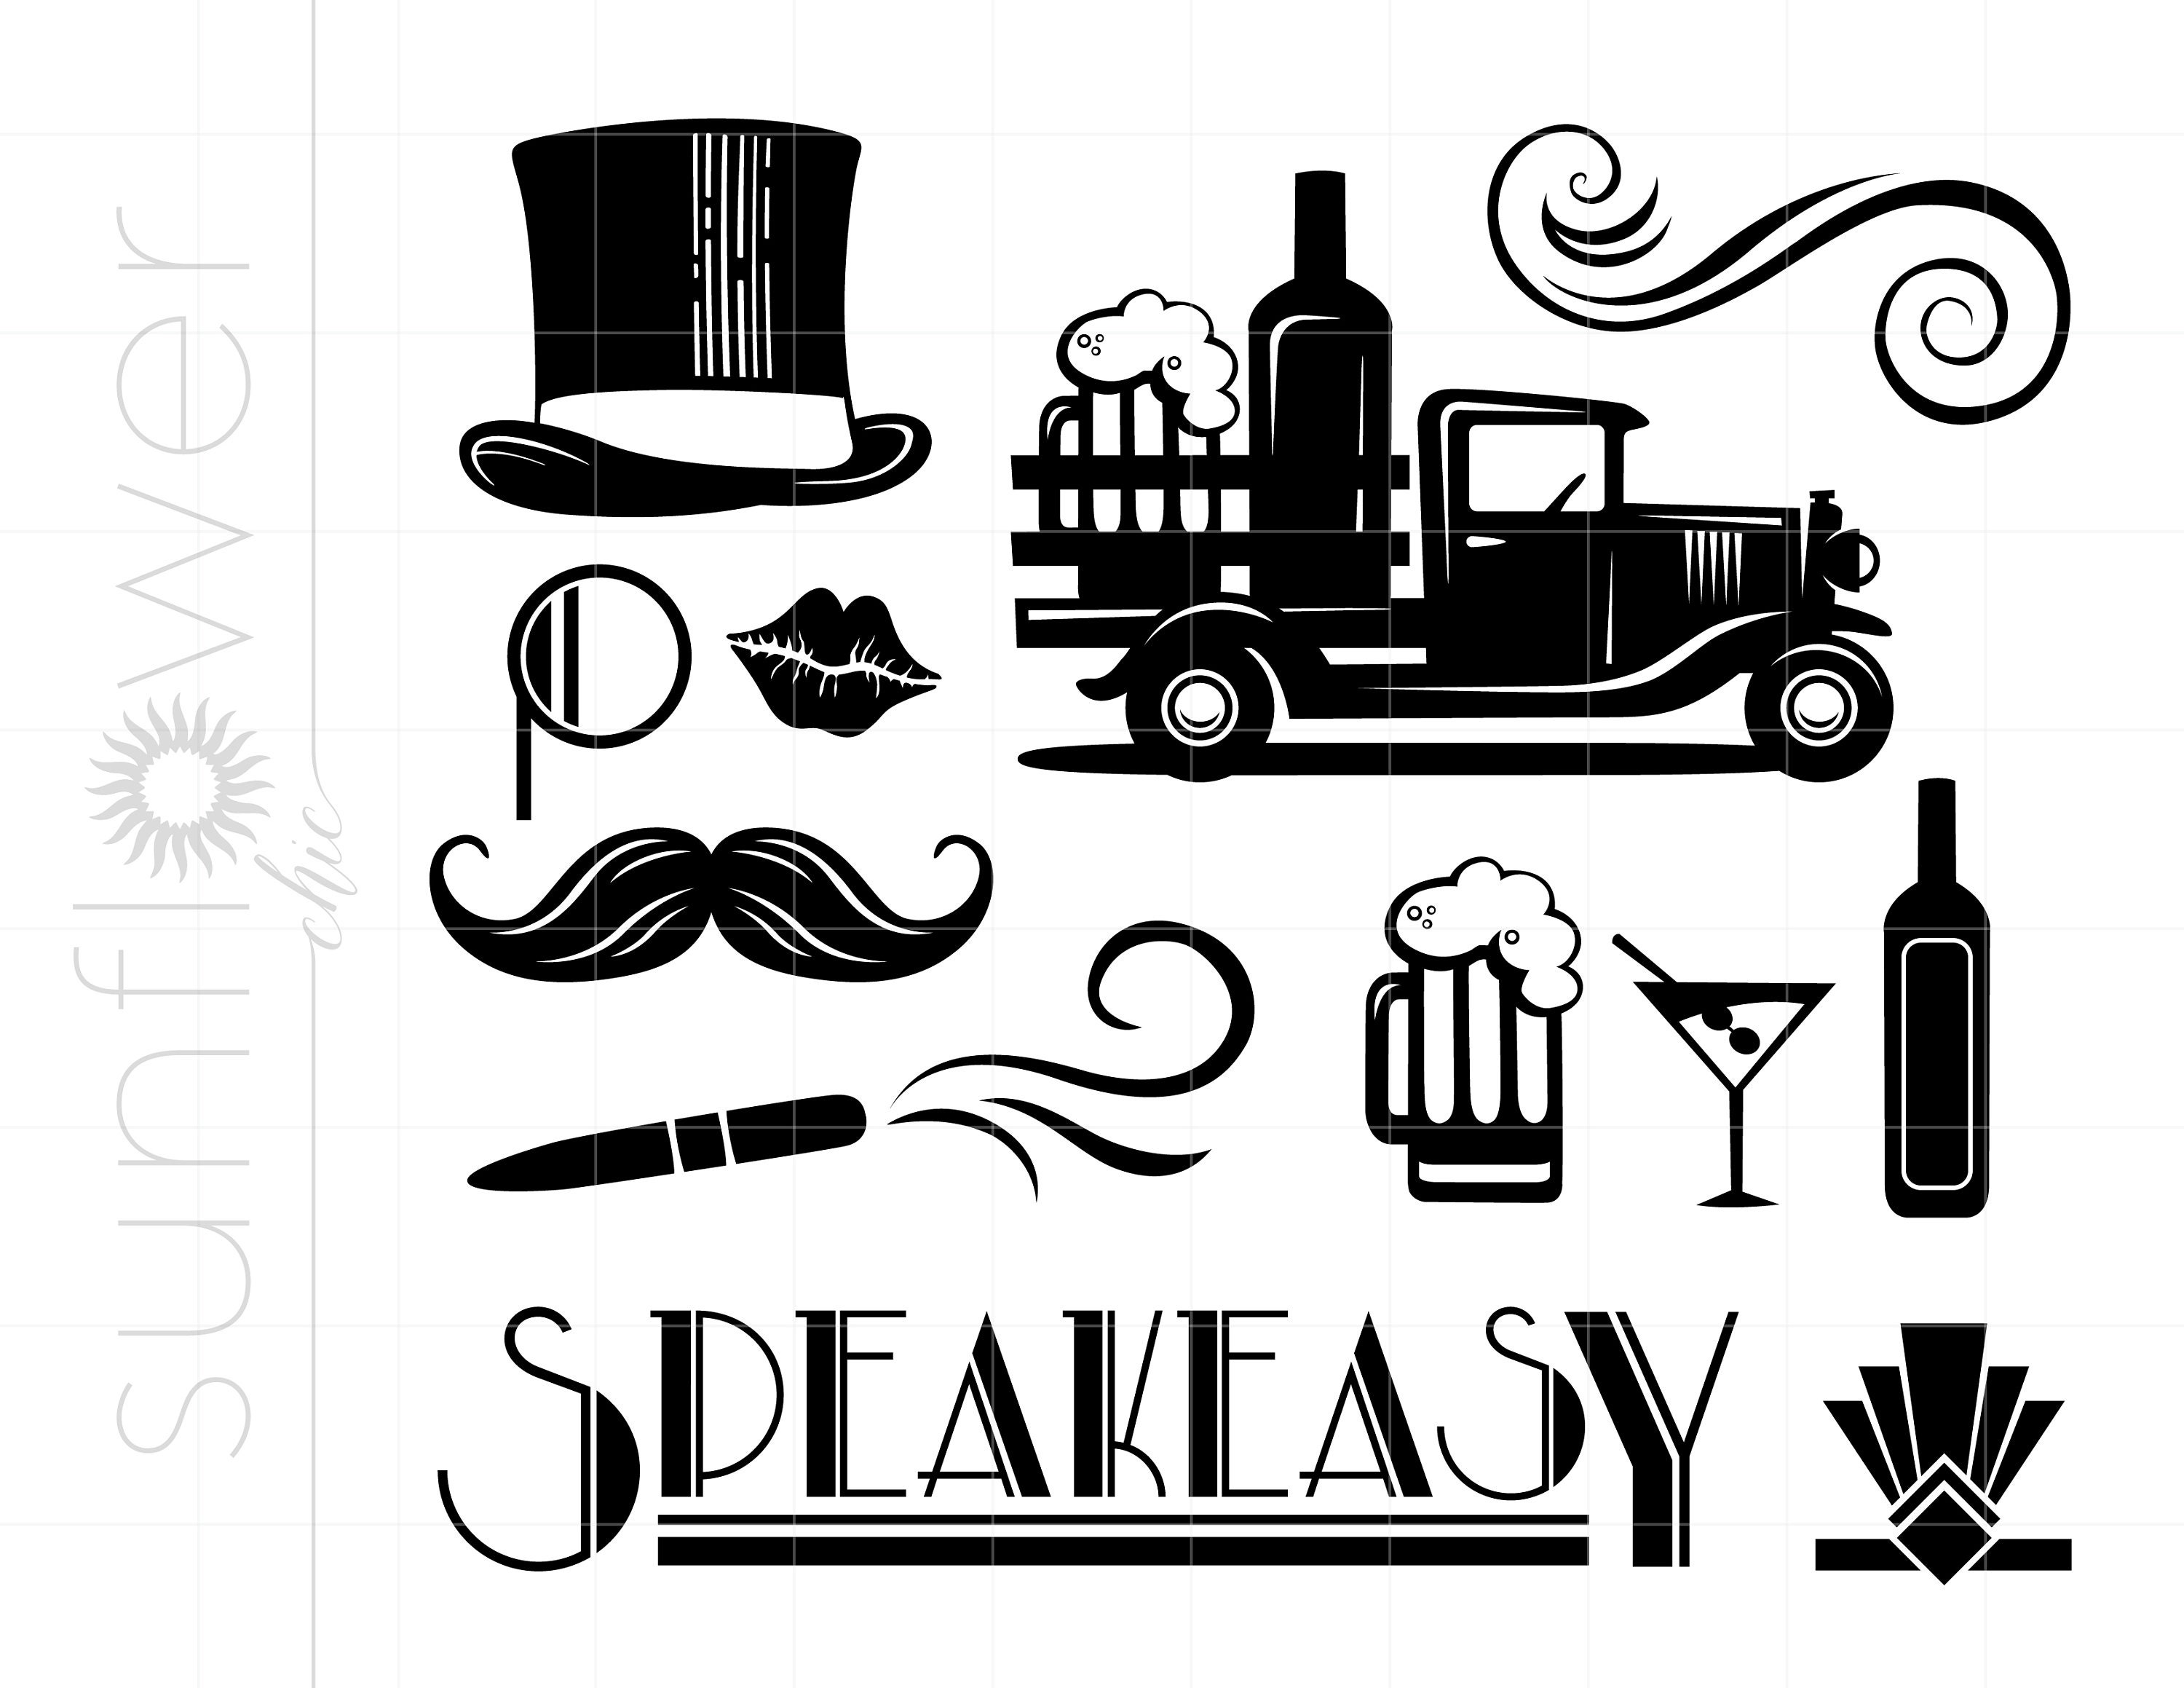 Madcap Frenzy: graphic design, DIY and everything in-between: End of the  Roaring 20s: 1920s Speakeasy Birthday Party